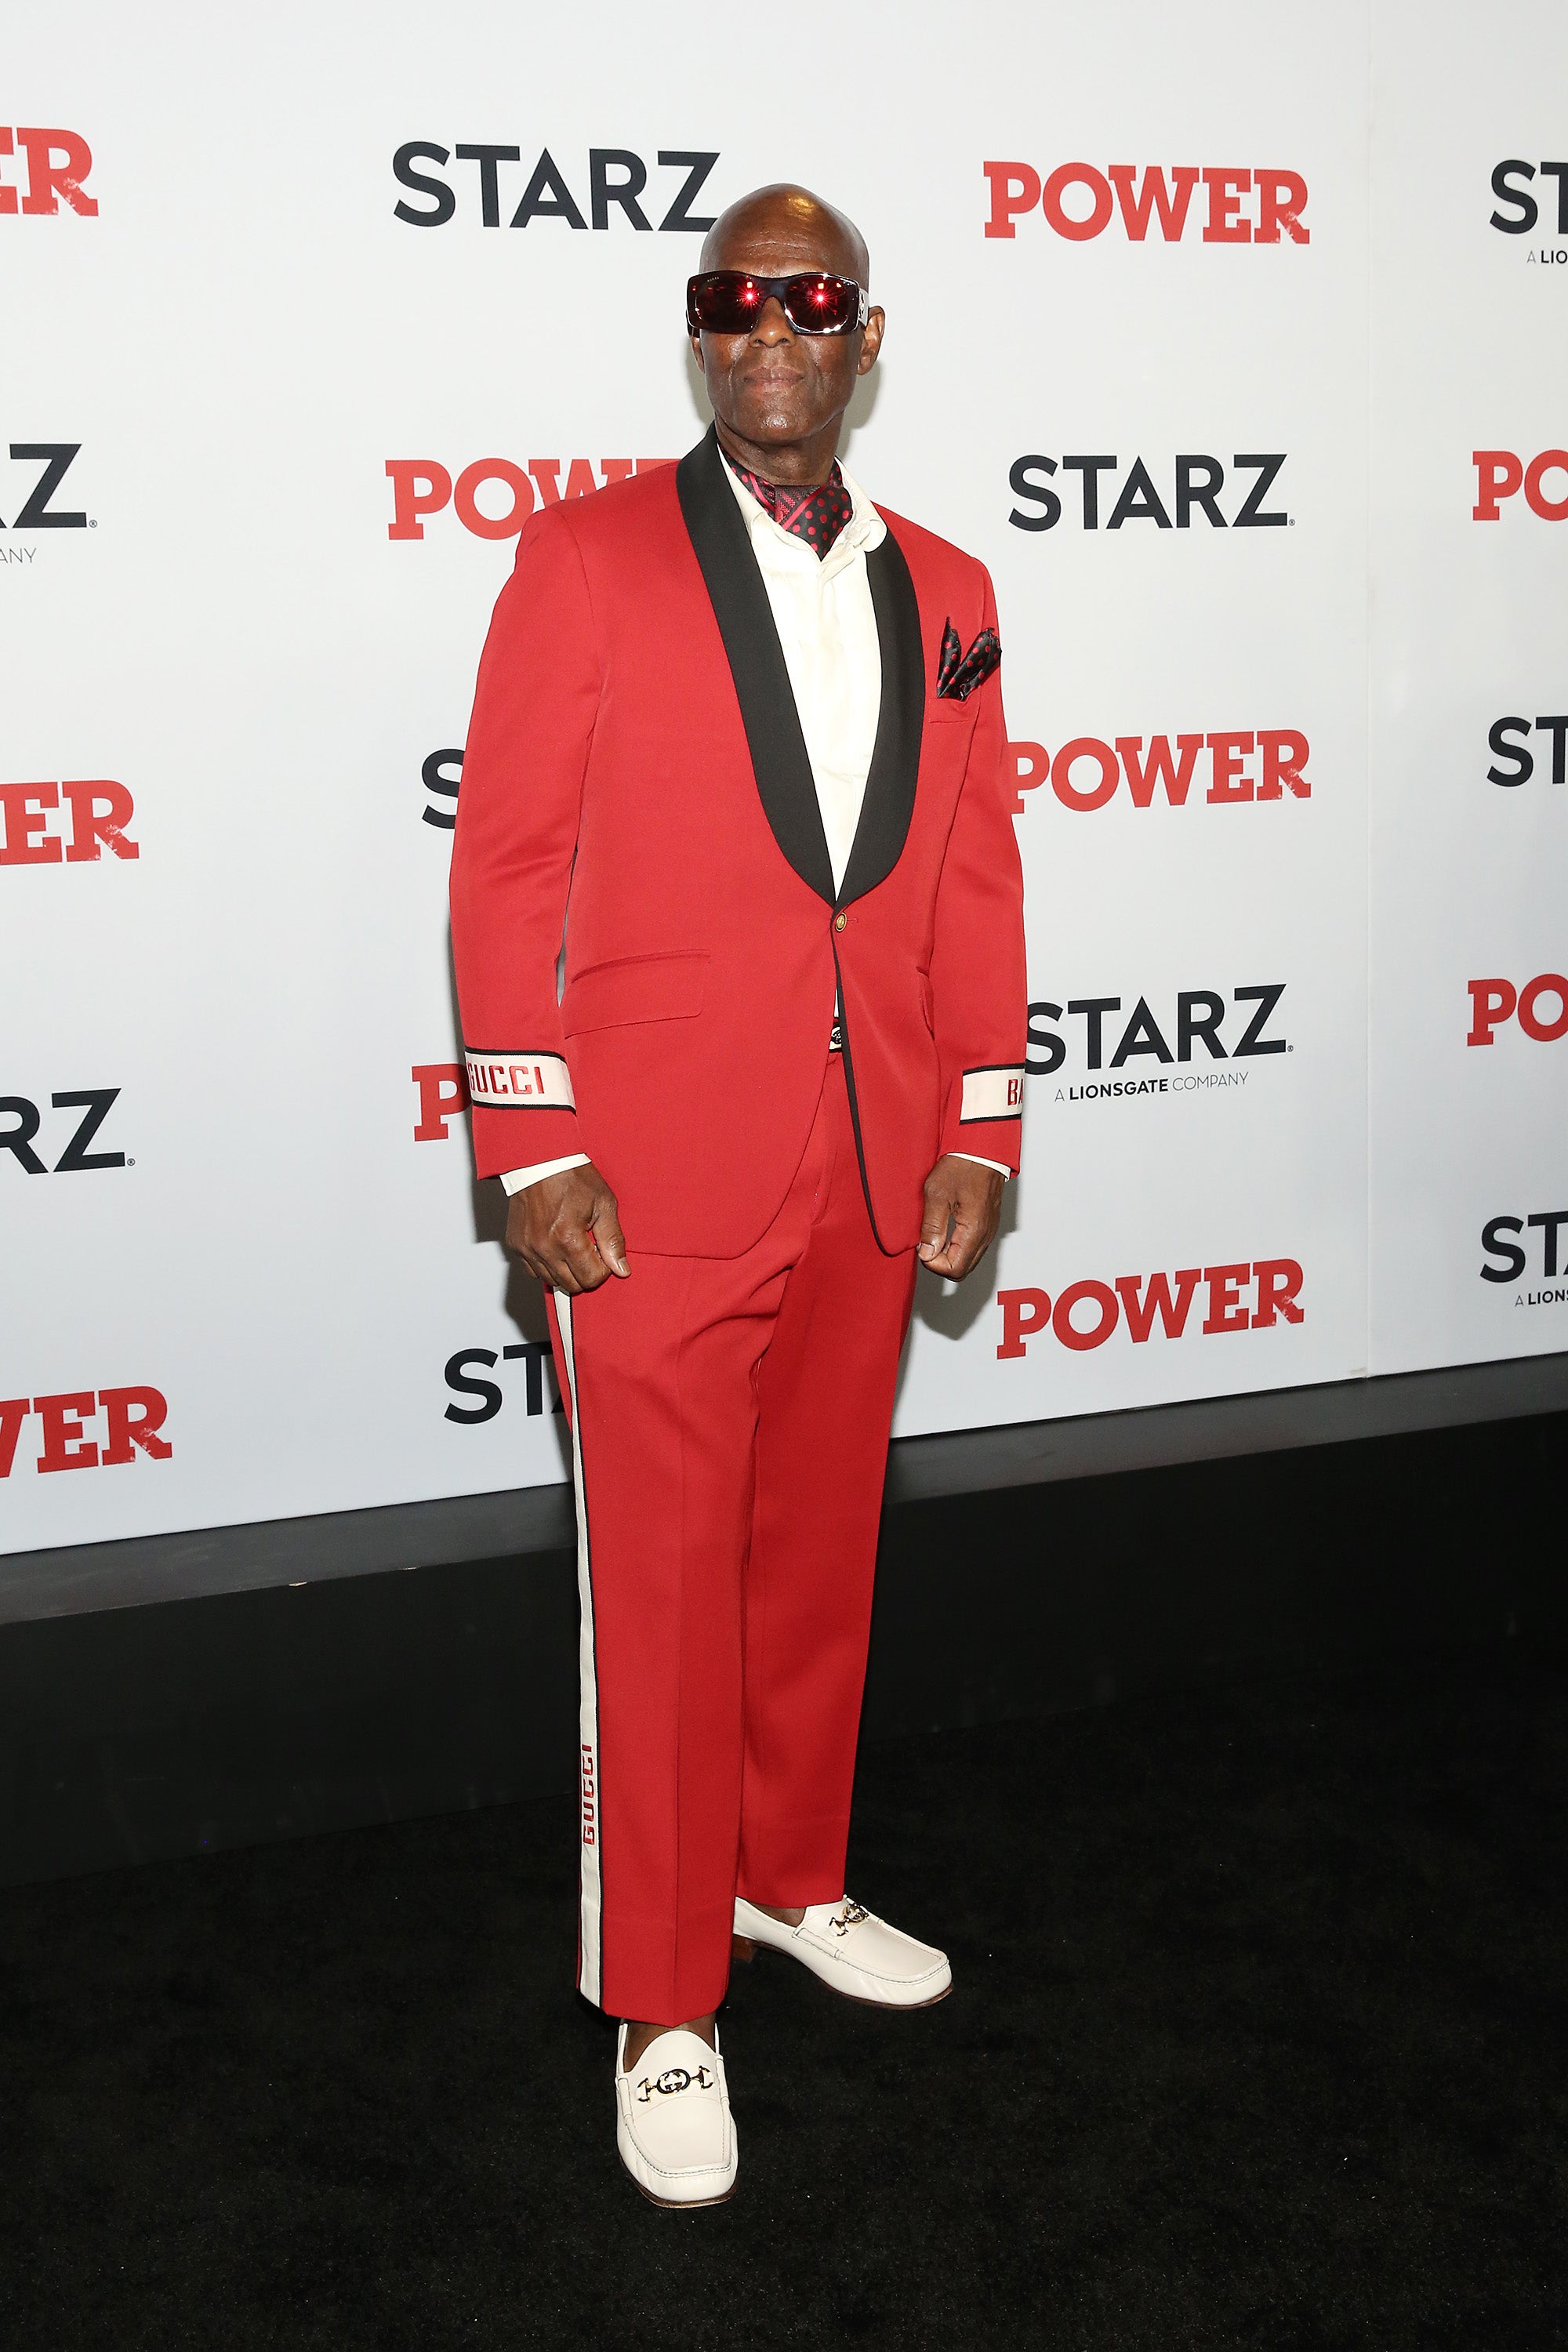 Our Favorite Fashion Moments At The ‘Power’ Premiere